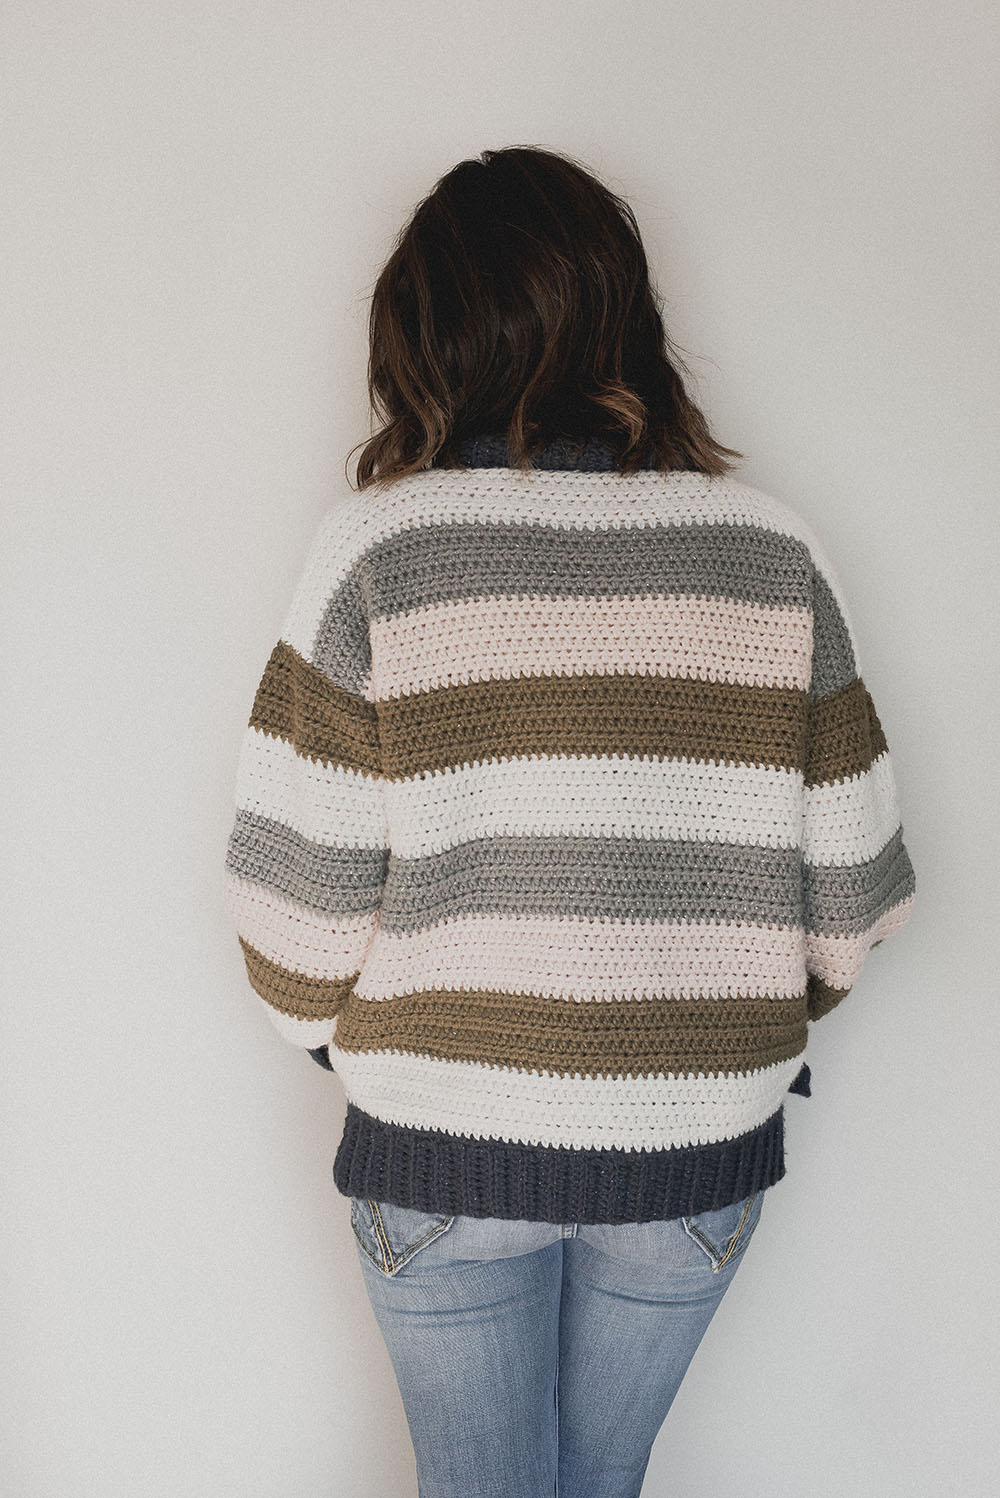 Free Crochet Pattern - Retro Stripes Sweater — Megmade with Love